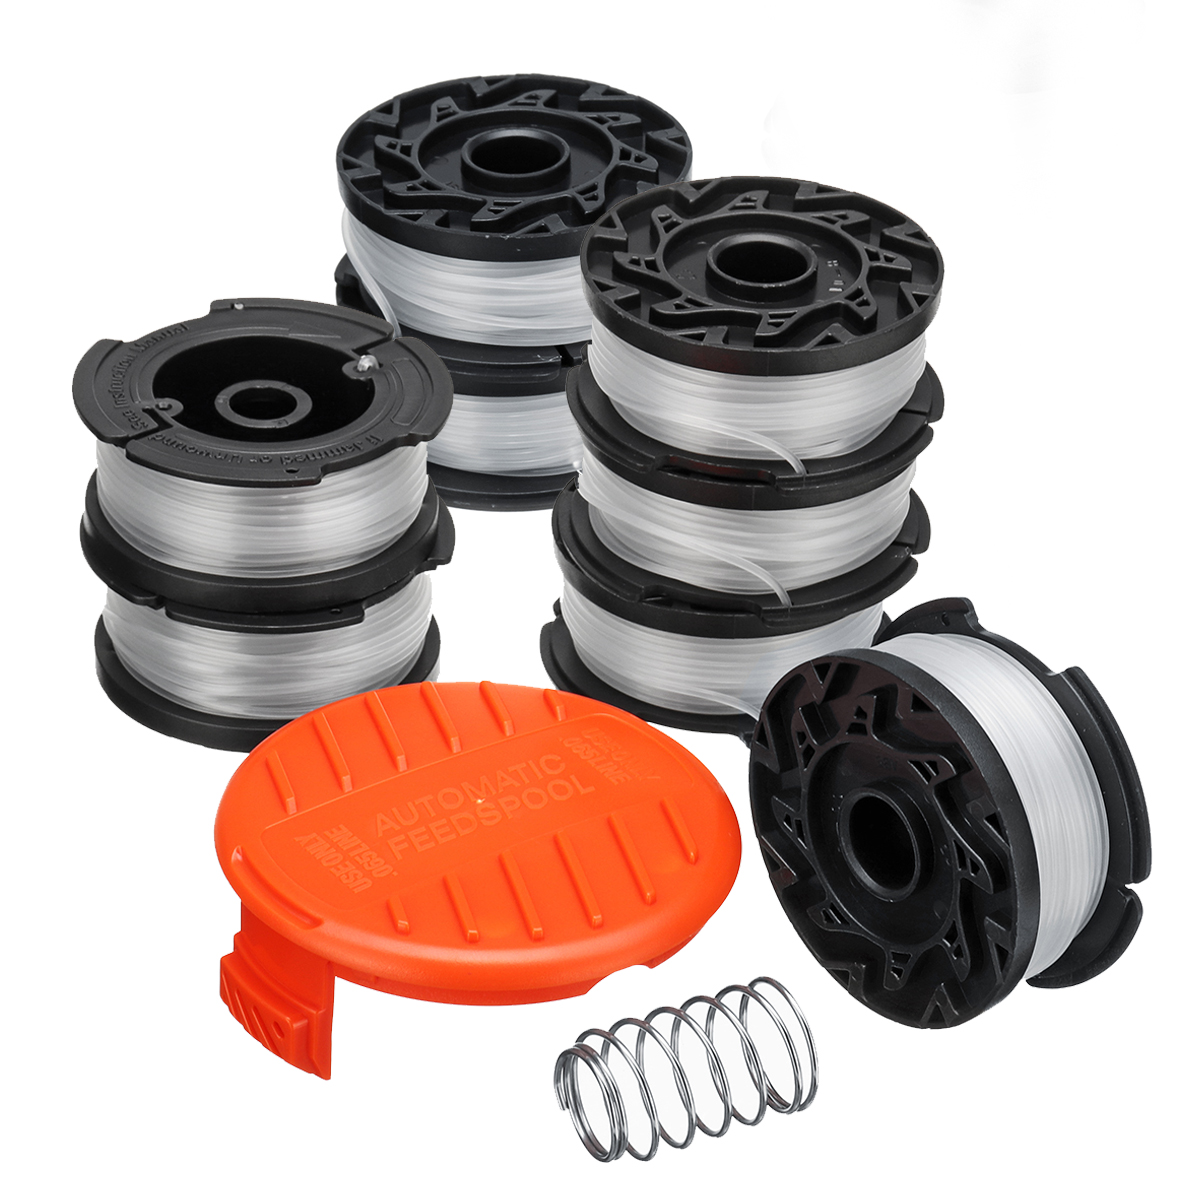 

8pcs 0.065 Spool Line String with Cover and Spring Lawnmower Trimmer Compatible Accessories